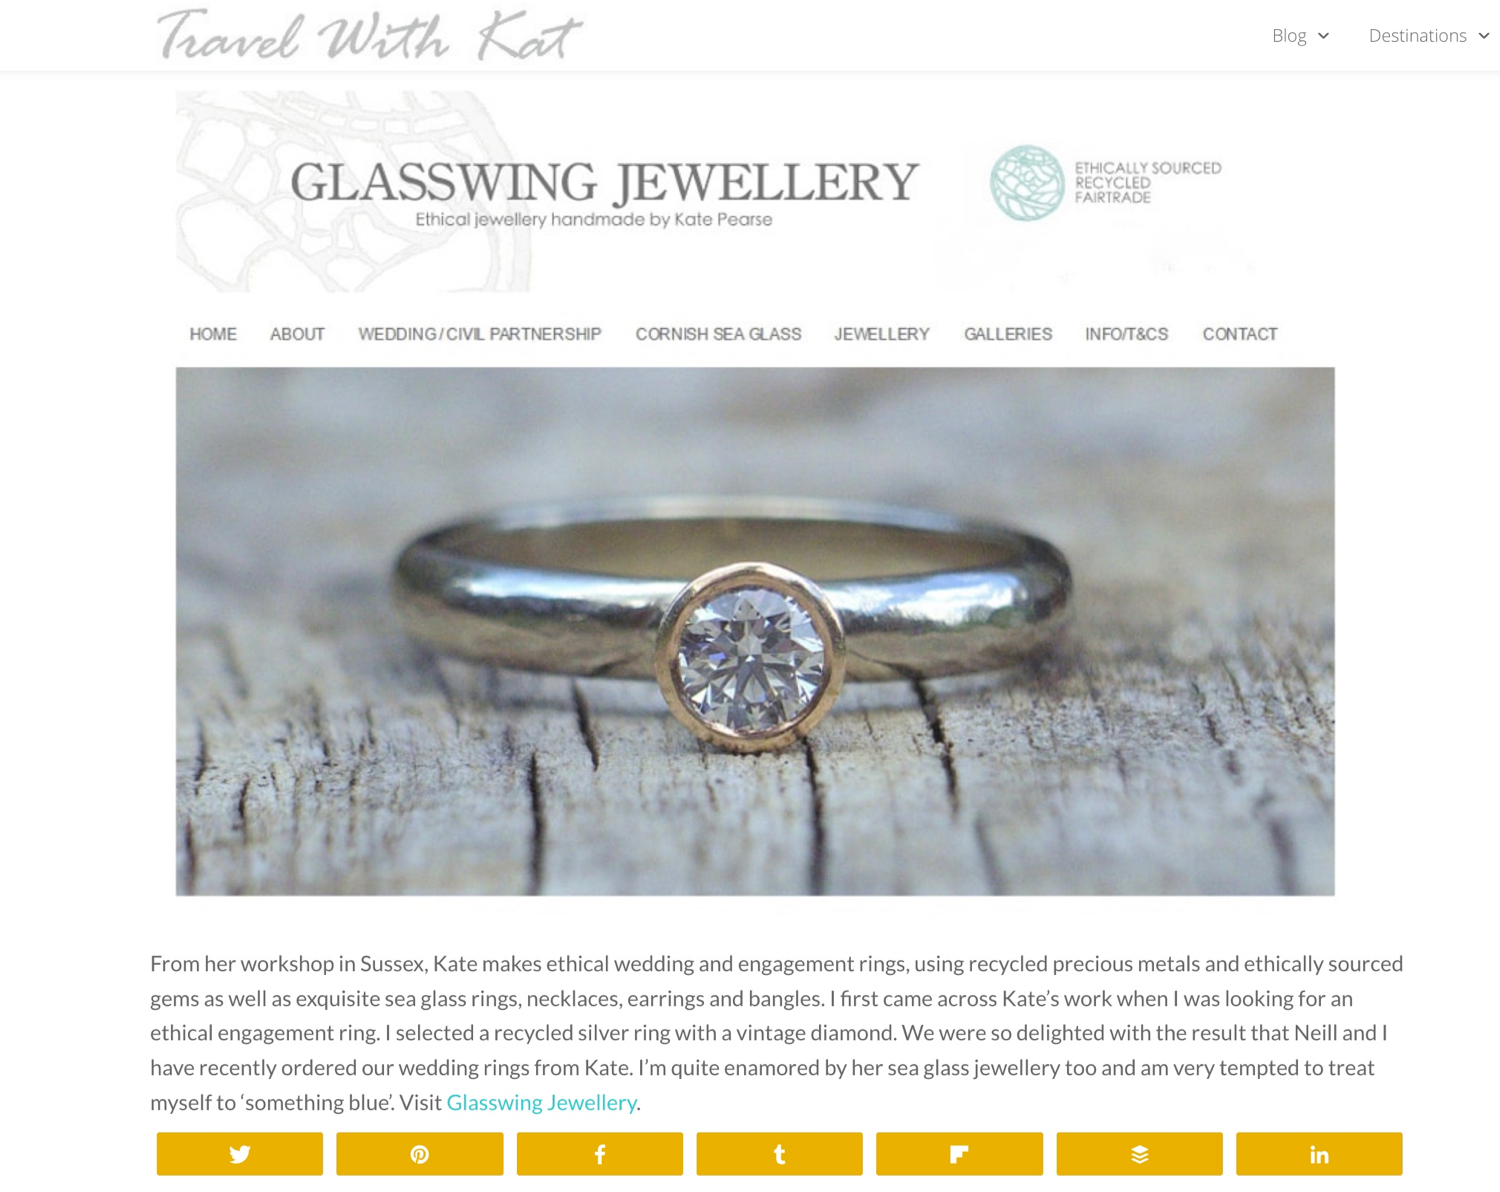 travel-with-kat-feature-glasswing-jewellery.jpg